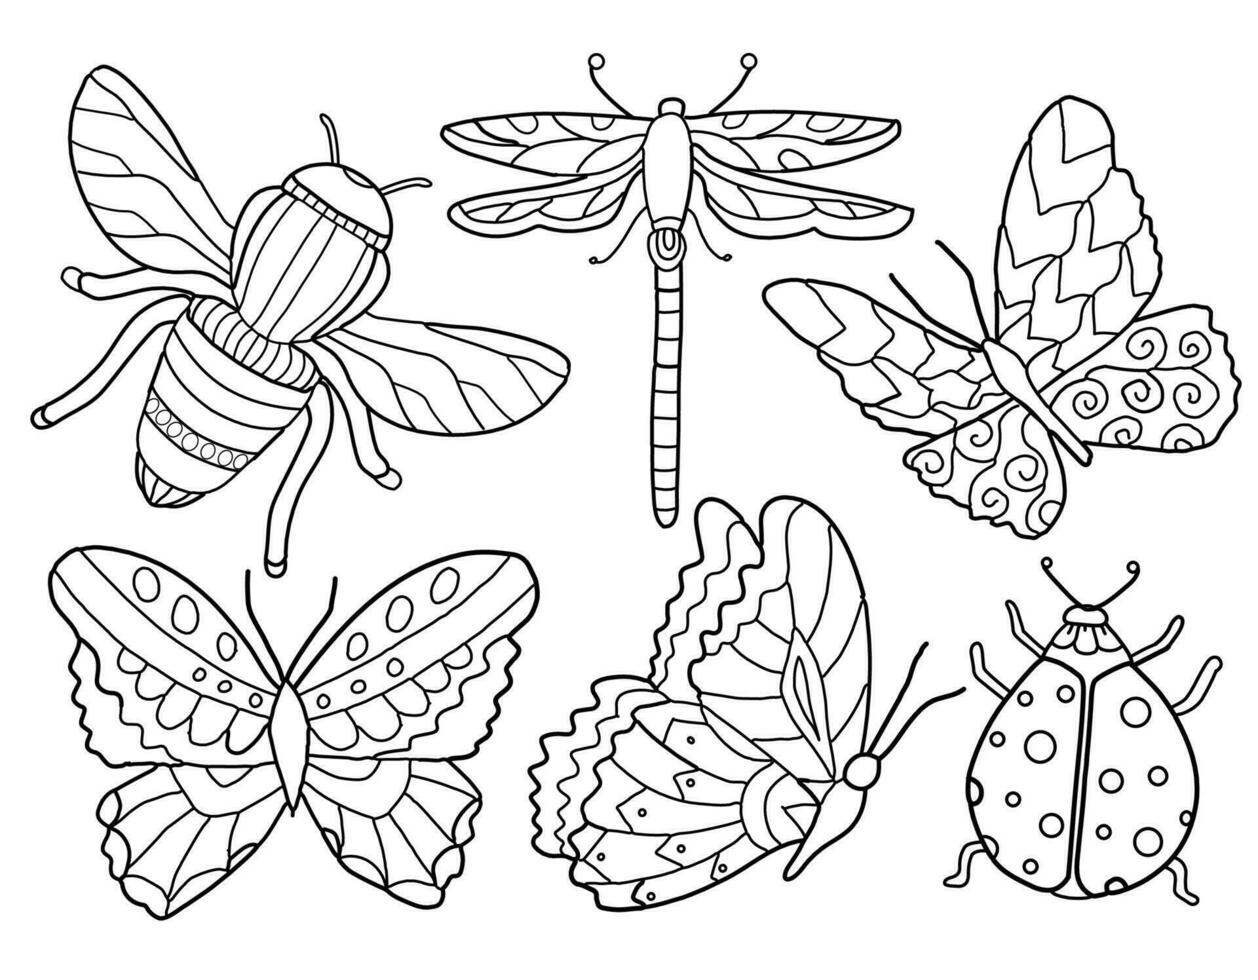 Ornate linear Insect drawings. Butterflies, bee, ladybug, dragonfly. Hand drawing coloring for kids and adults. Beautiful drawings with patterns and small details.  Butterfly illustration. Vector